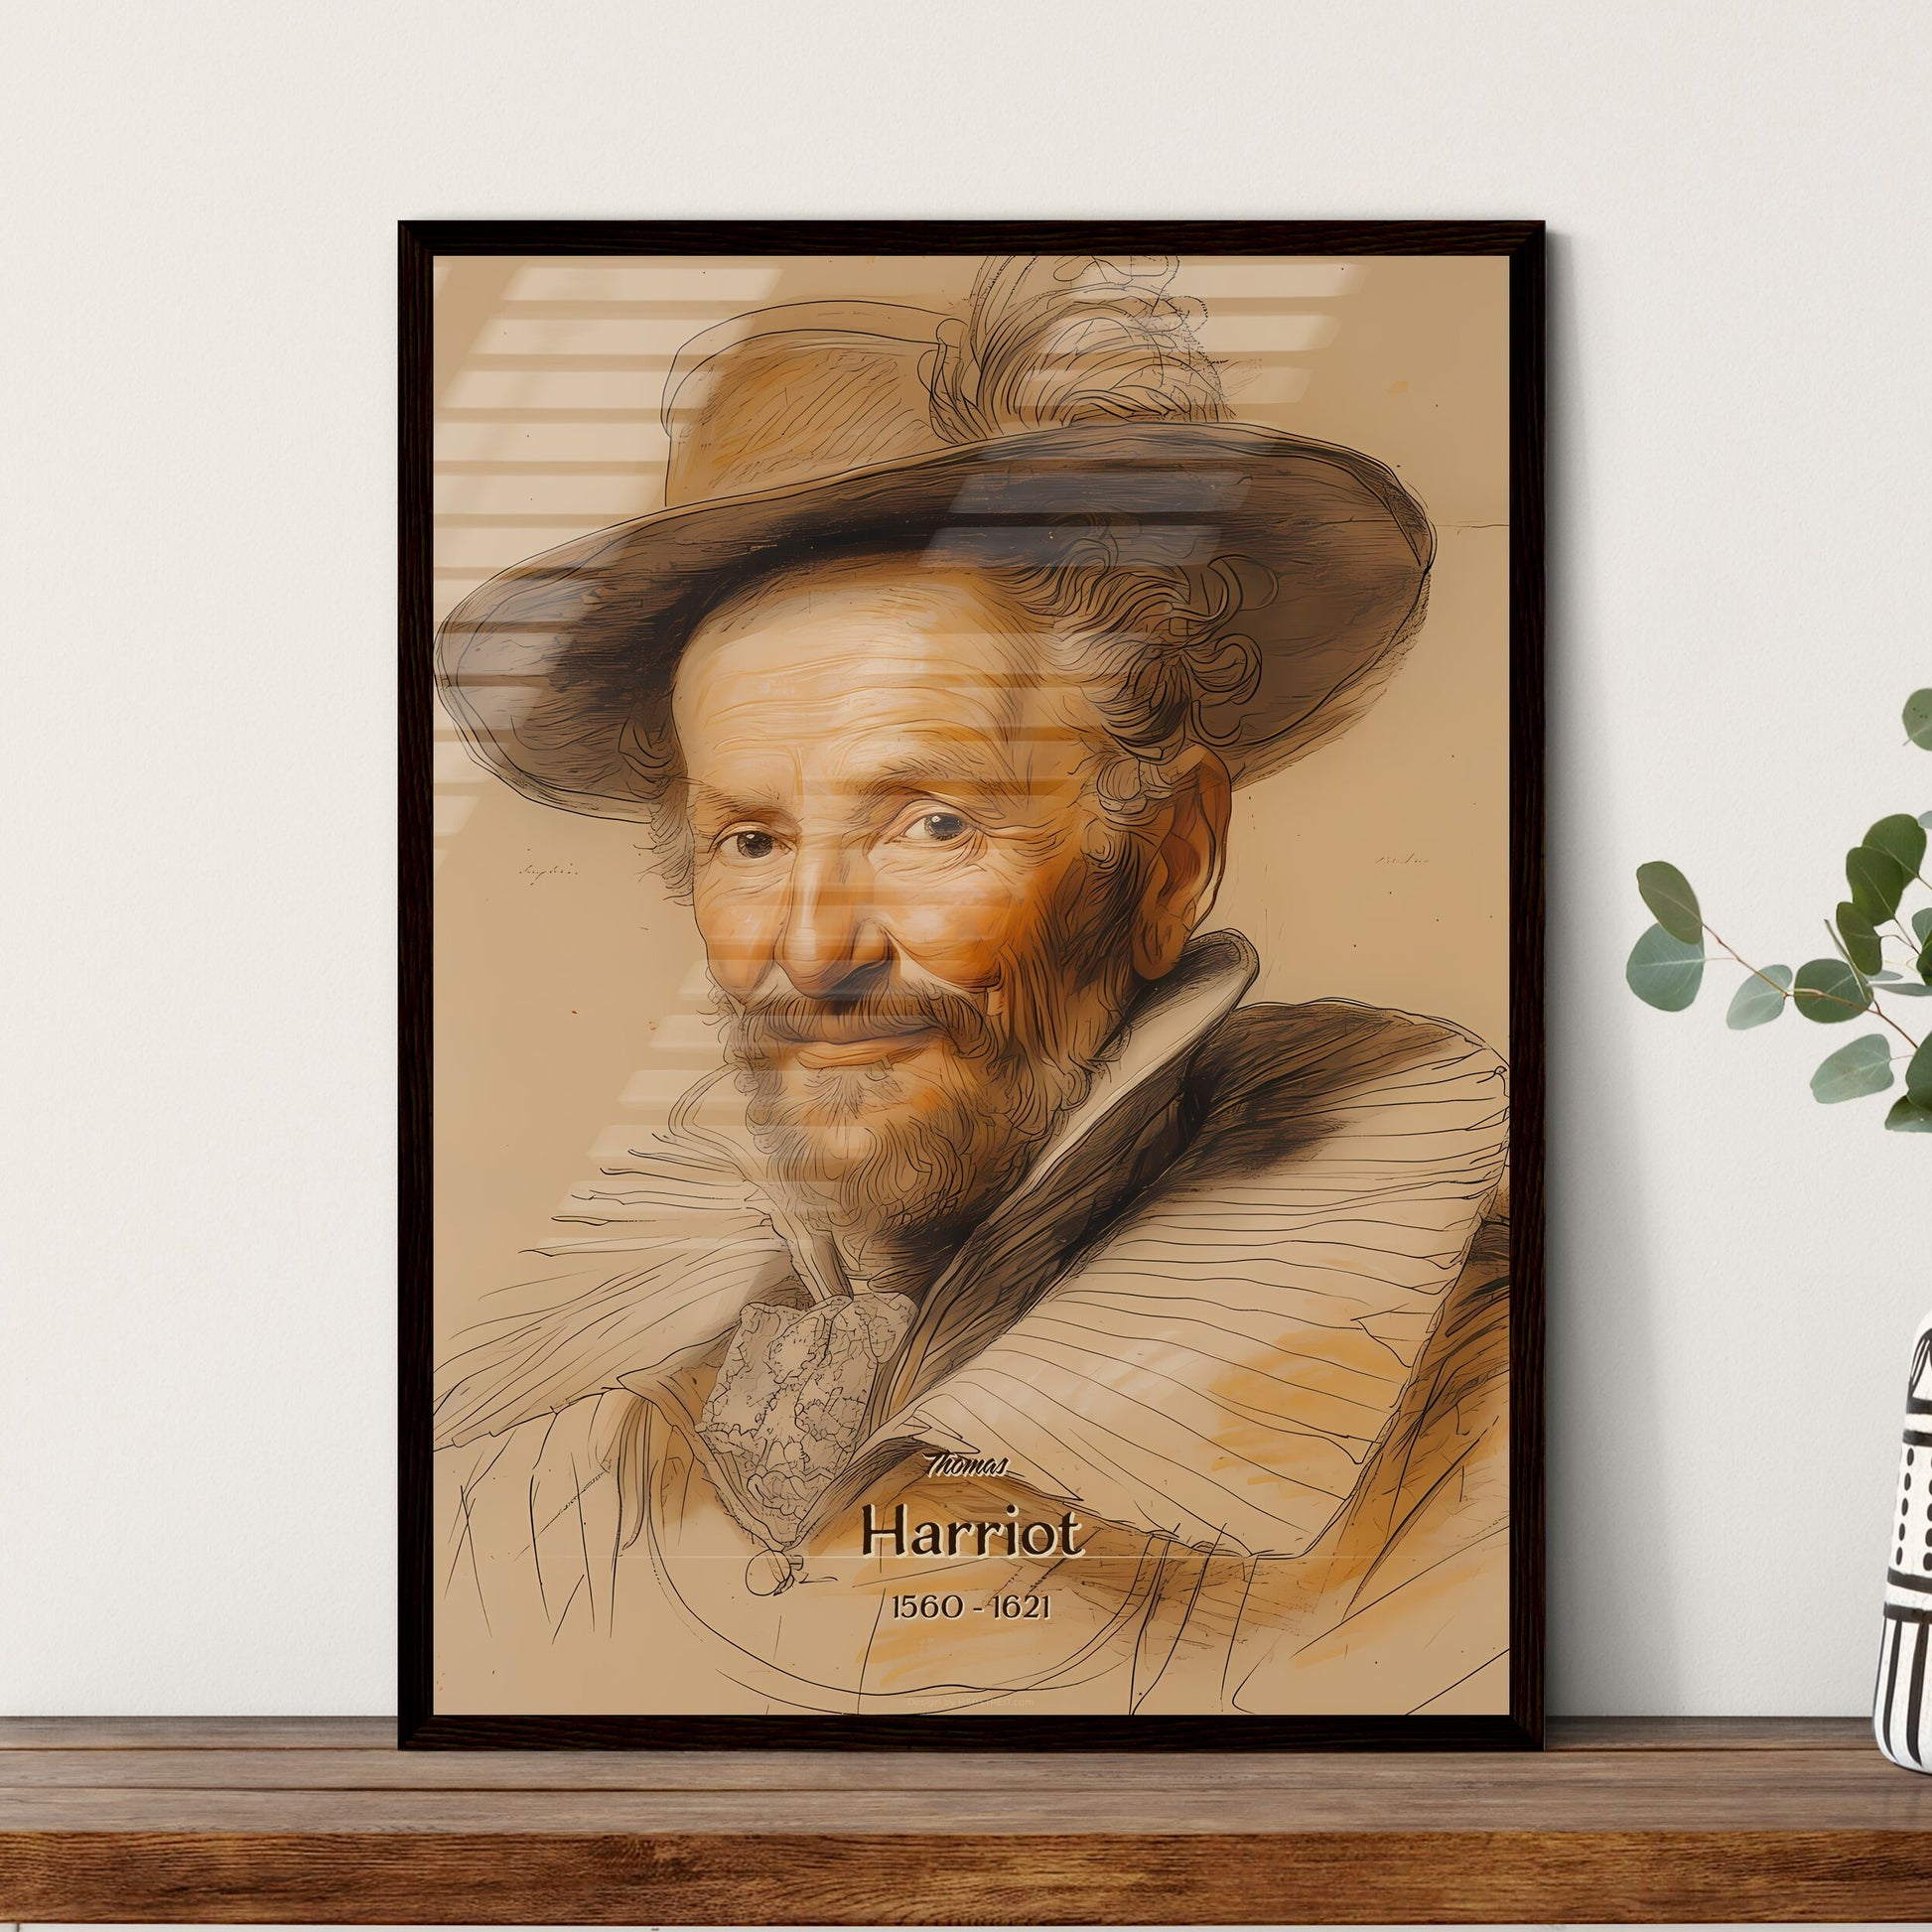 Thomas, Harriot, 1560 - 1621, A Poster of a man wearing a hat Default Title